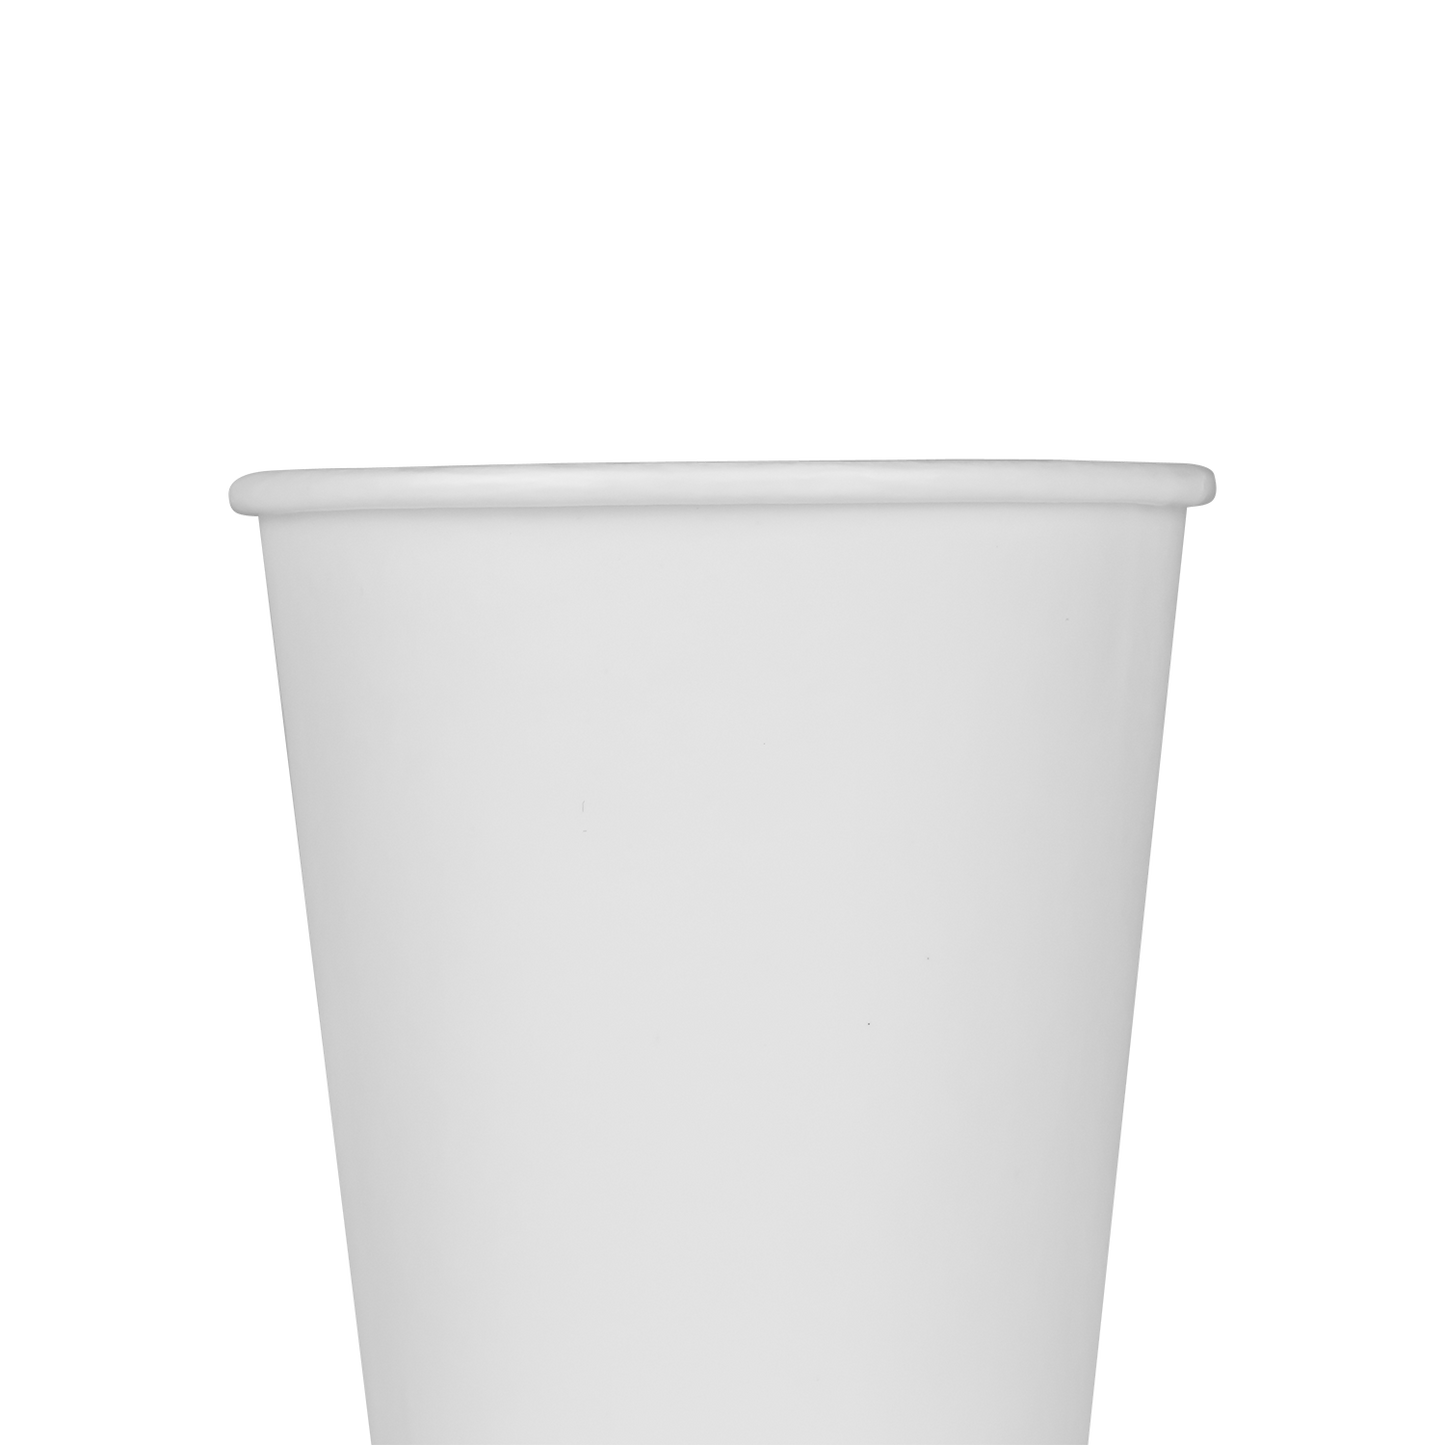 Karat 12oz Insulated Paper Hot Cups - White (90mm) - 500 ct